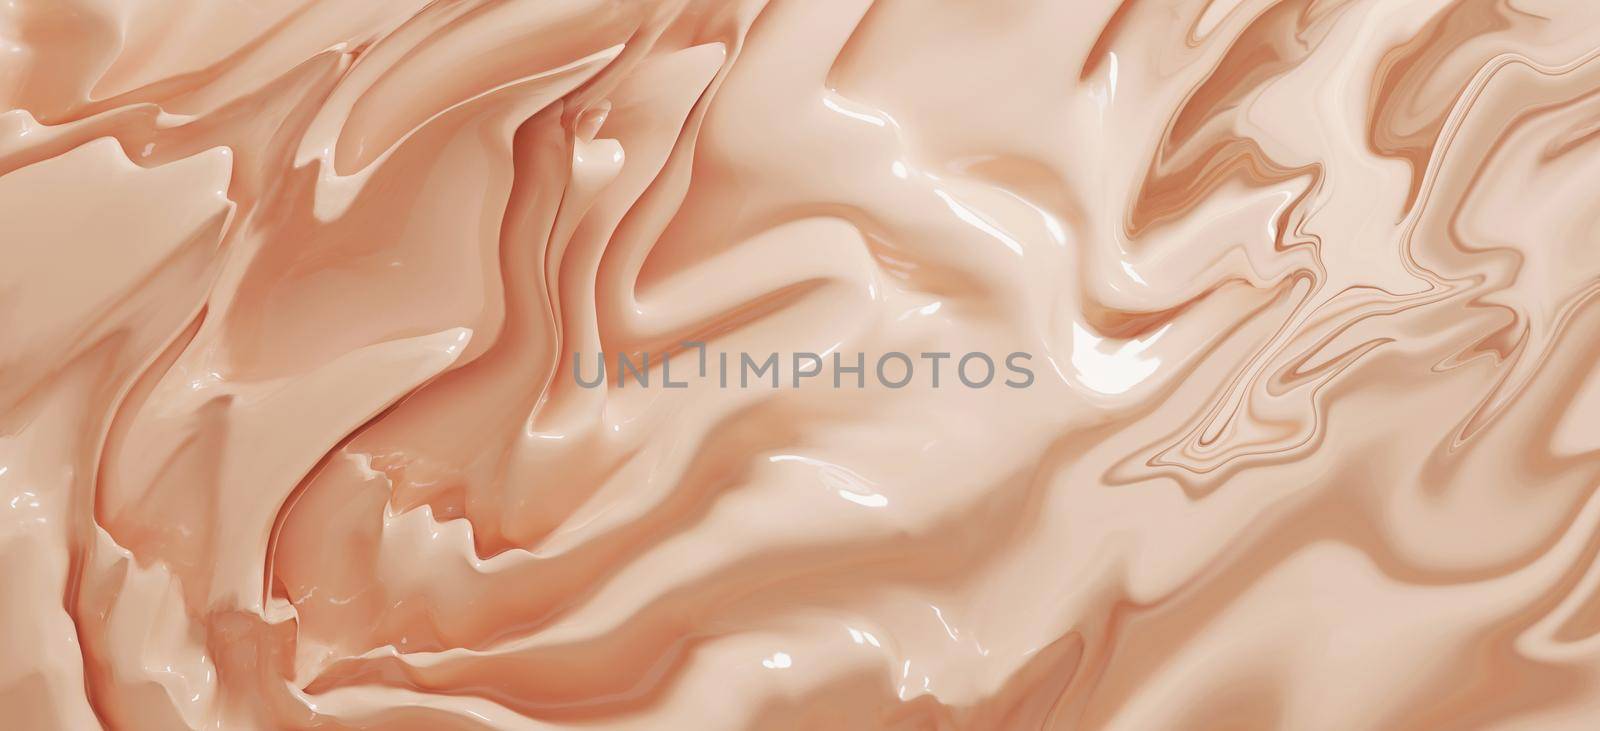 Cosmetic foundation cream texture background 3D render